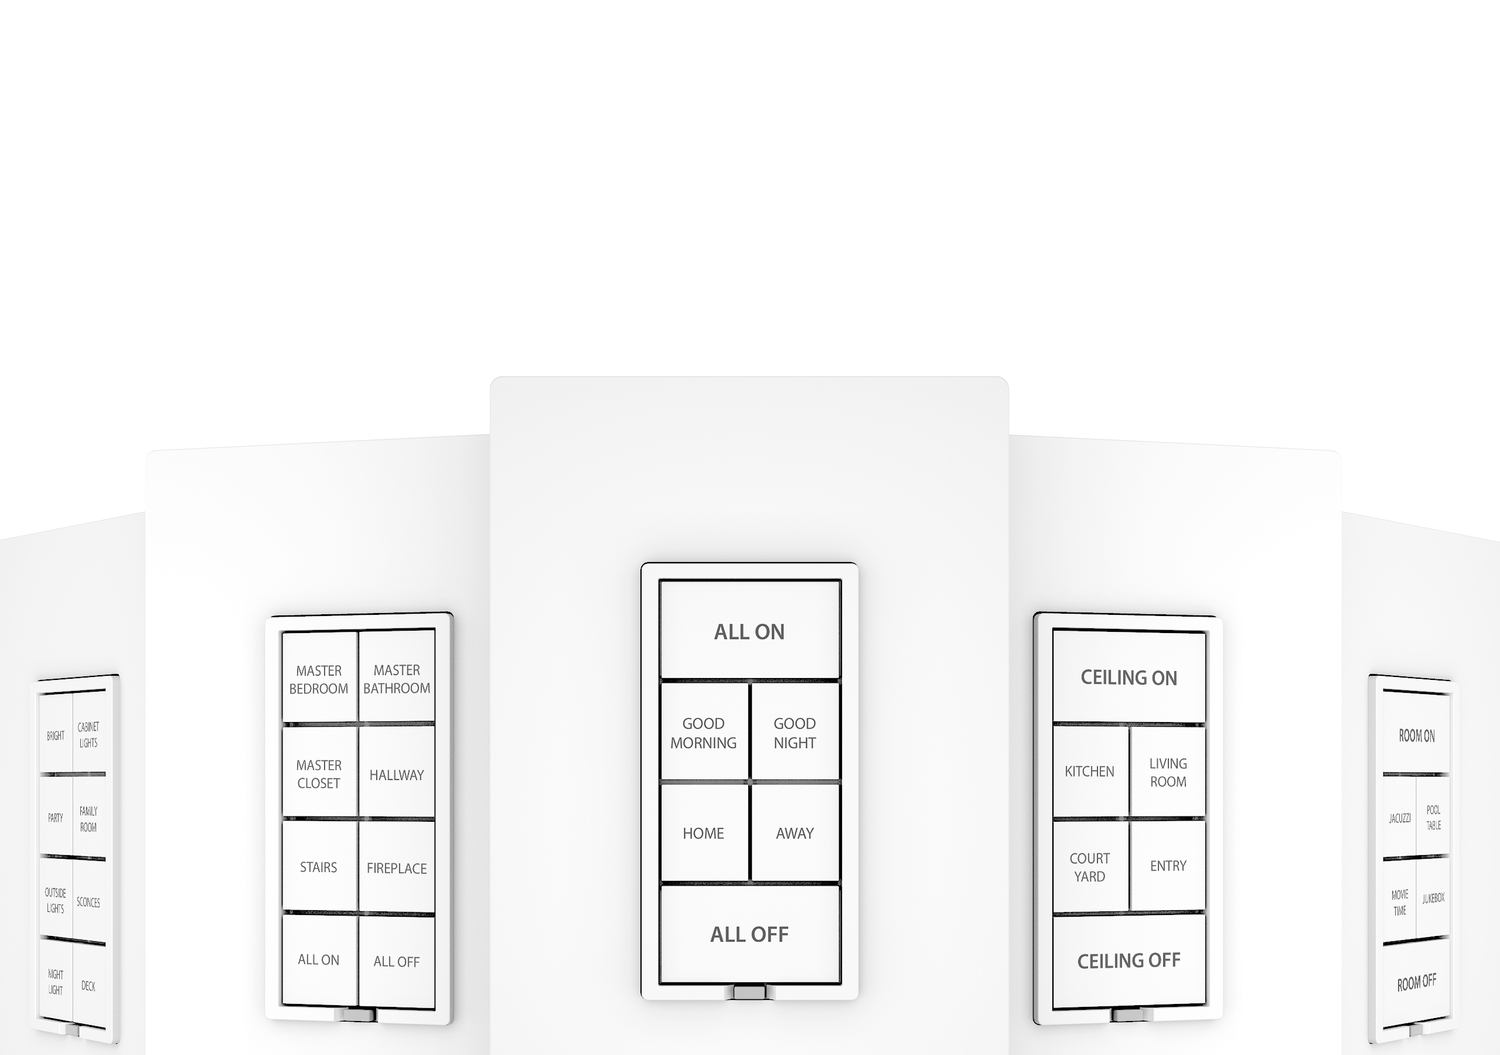 An Insteon Wall Keypad is a unique blend of wall switch and multi-button remote control. When you replace your existing wall switch with an Insteon Keypad, you keep control of your light fixture while simultaneously adding remote control of other Insteon devices.